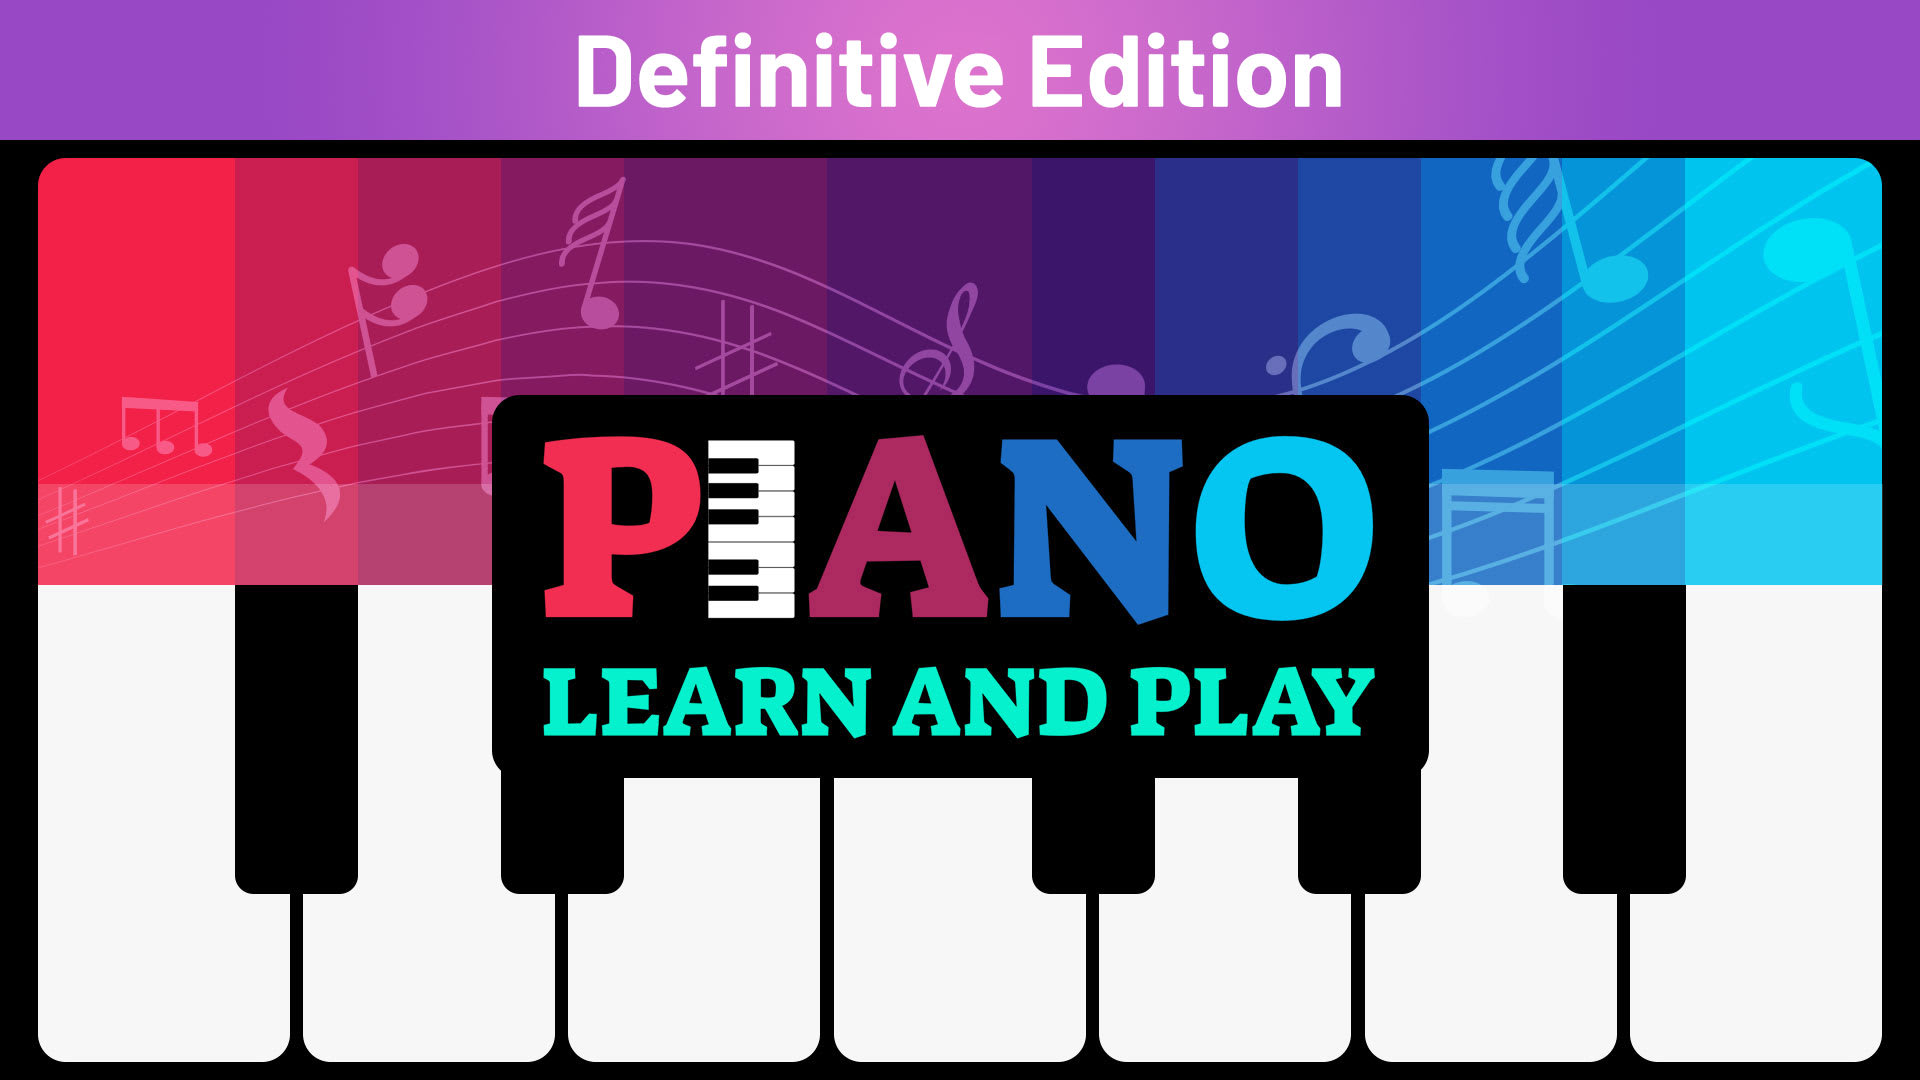 Piano: Learn and Play Definitive Edition